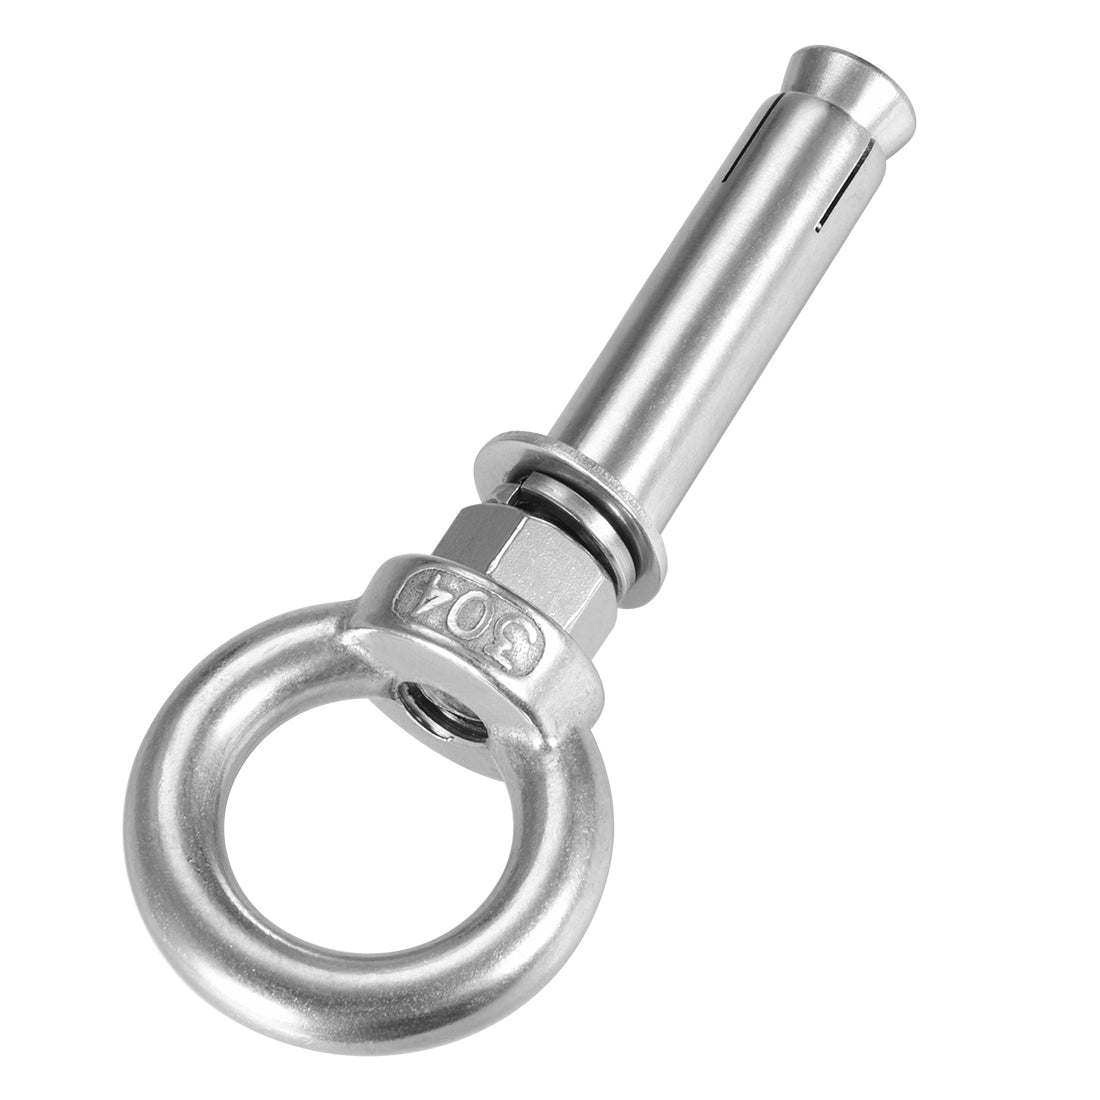 uxcell Uxcell M12 x 90 Expansion Eyebolt Eye Nut Screw with Ring Anchor Raw Bolts 1 Pcs